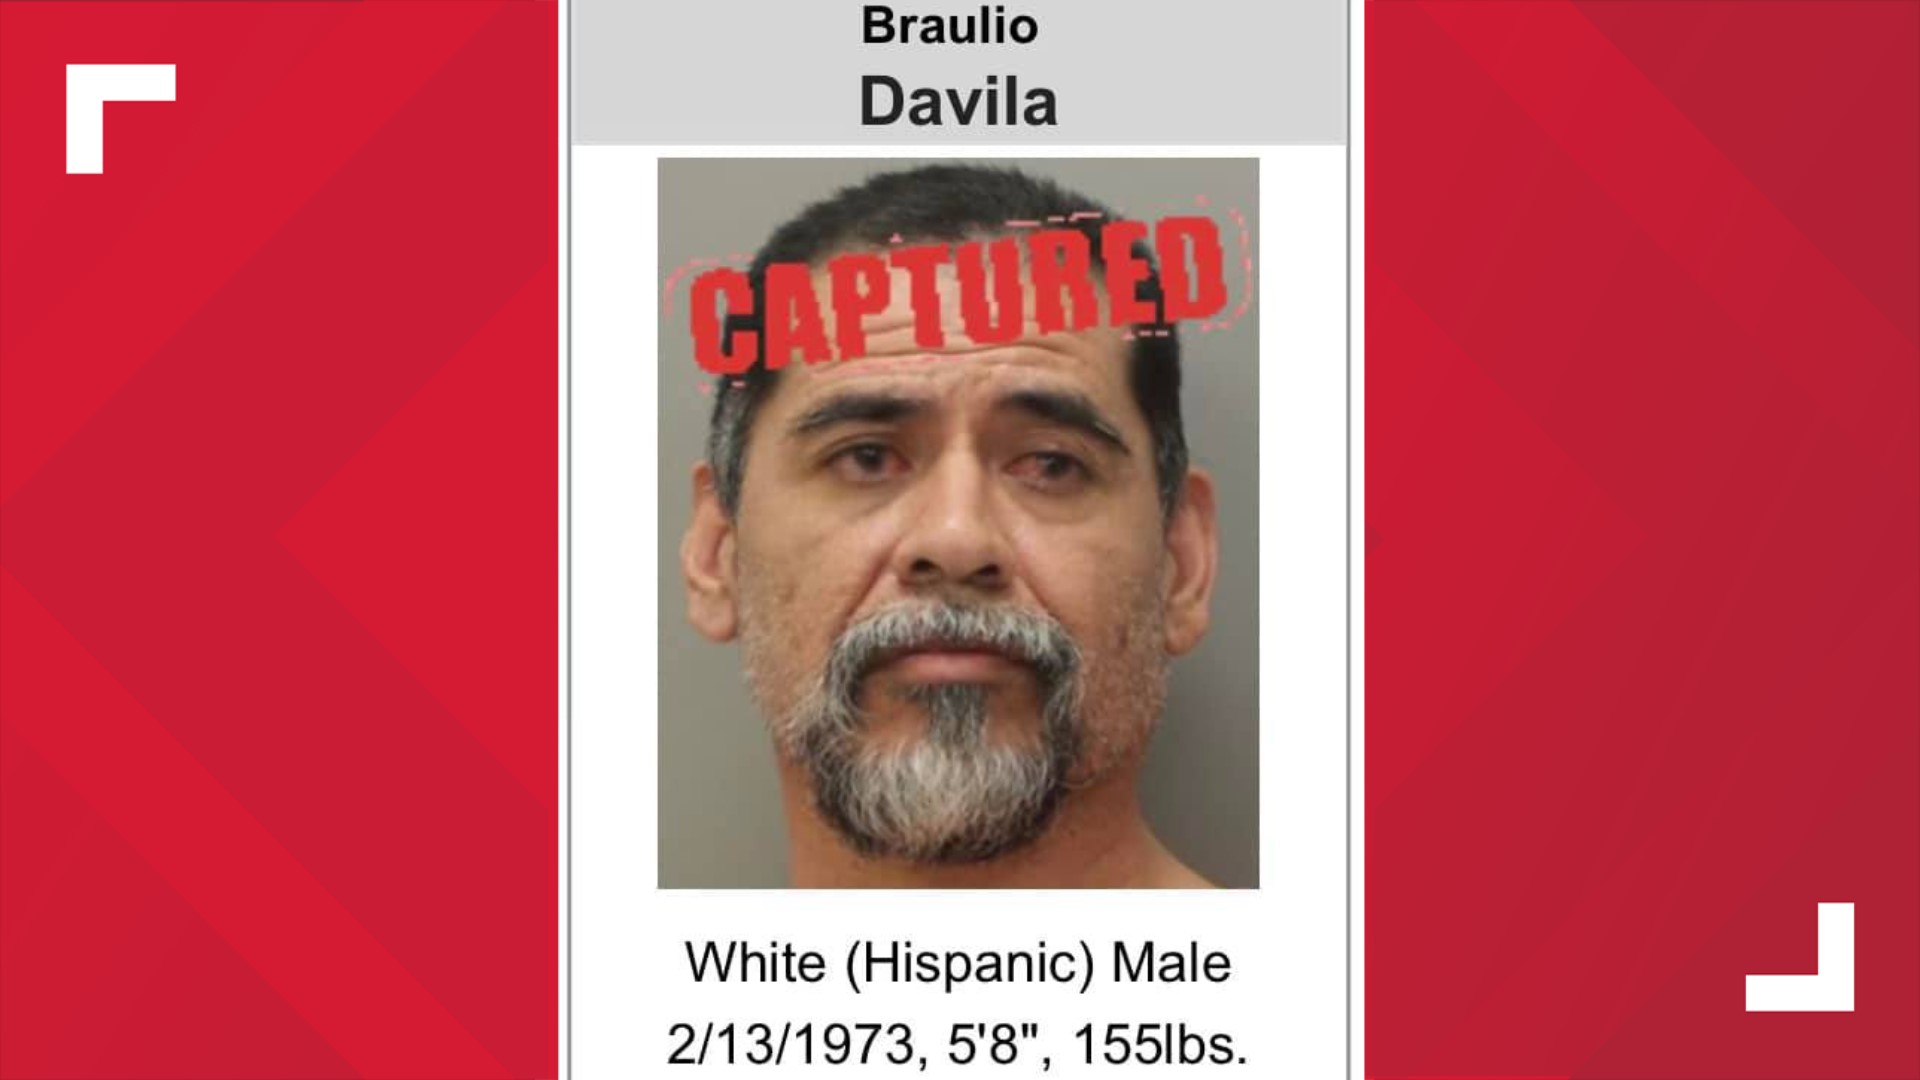 Braulio Davila-Luna was wanted for Failing to Register as a Sex Offender.